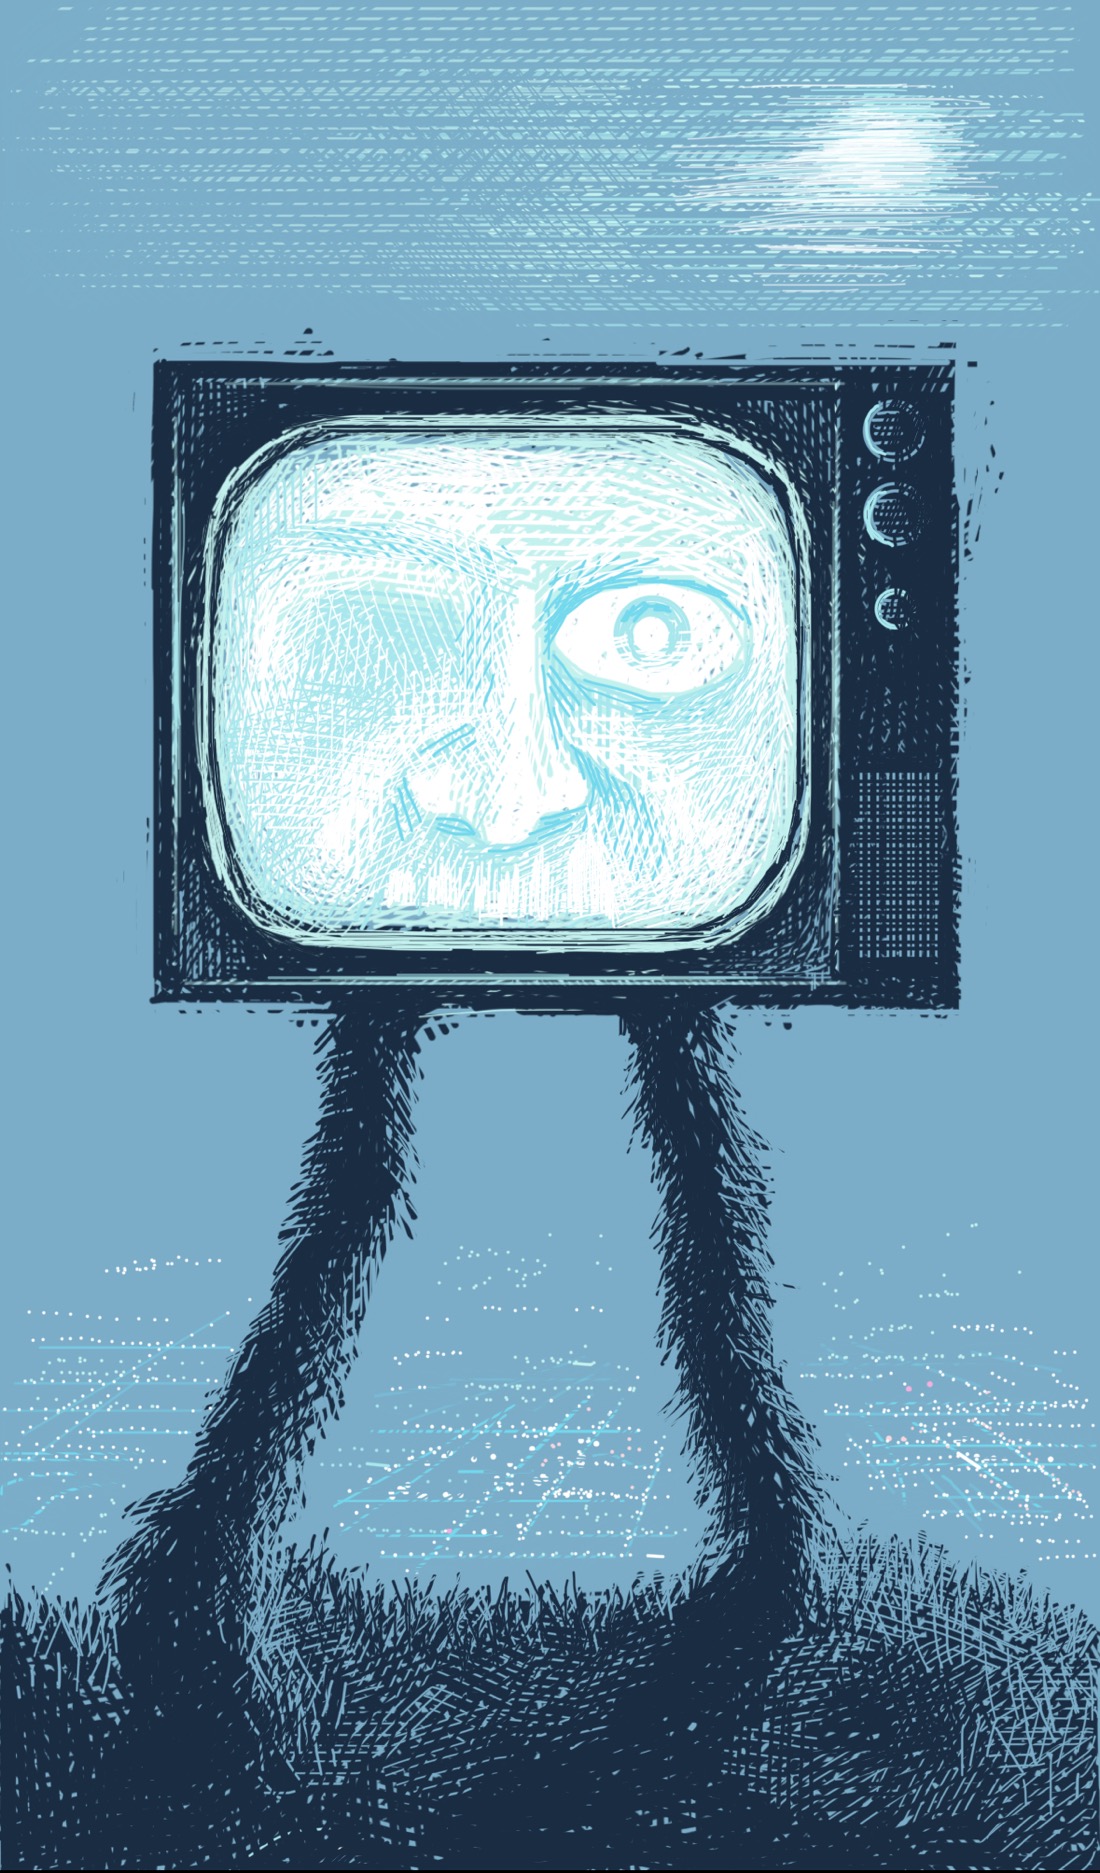 An old-style, monochrome television—you know, the kind with knobs and a cathode ray tube—stands on furry, spindly legs. It is standing on a grassy hill at night: behind it is the suggestion of a city seen from a great height, the streets defined by lights. There's a moon partially hidden behind fog. It is, altogether, a distinctly eerie scene; one made all the more unsettling by the fact that the television screen is on and glowing, displaying a monstrous staring face.